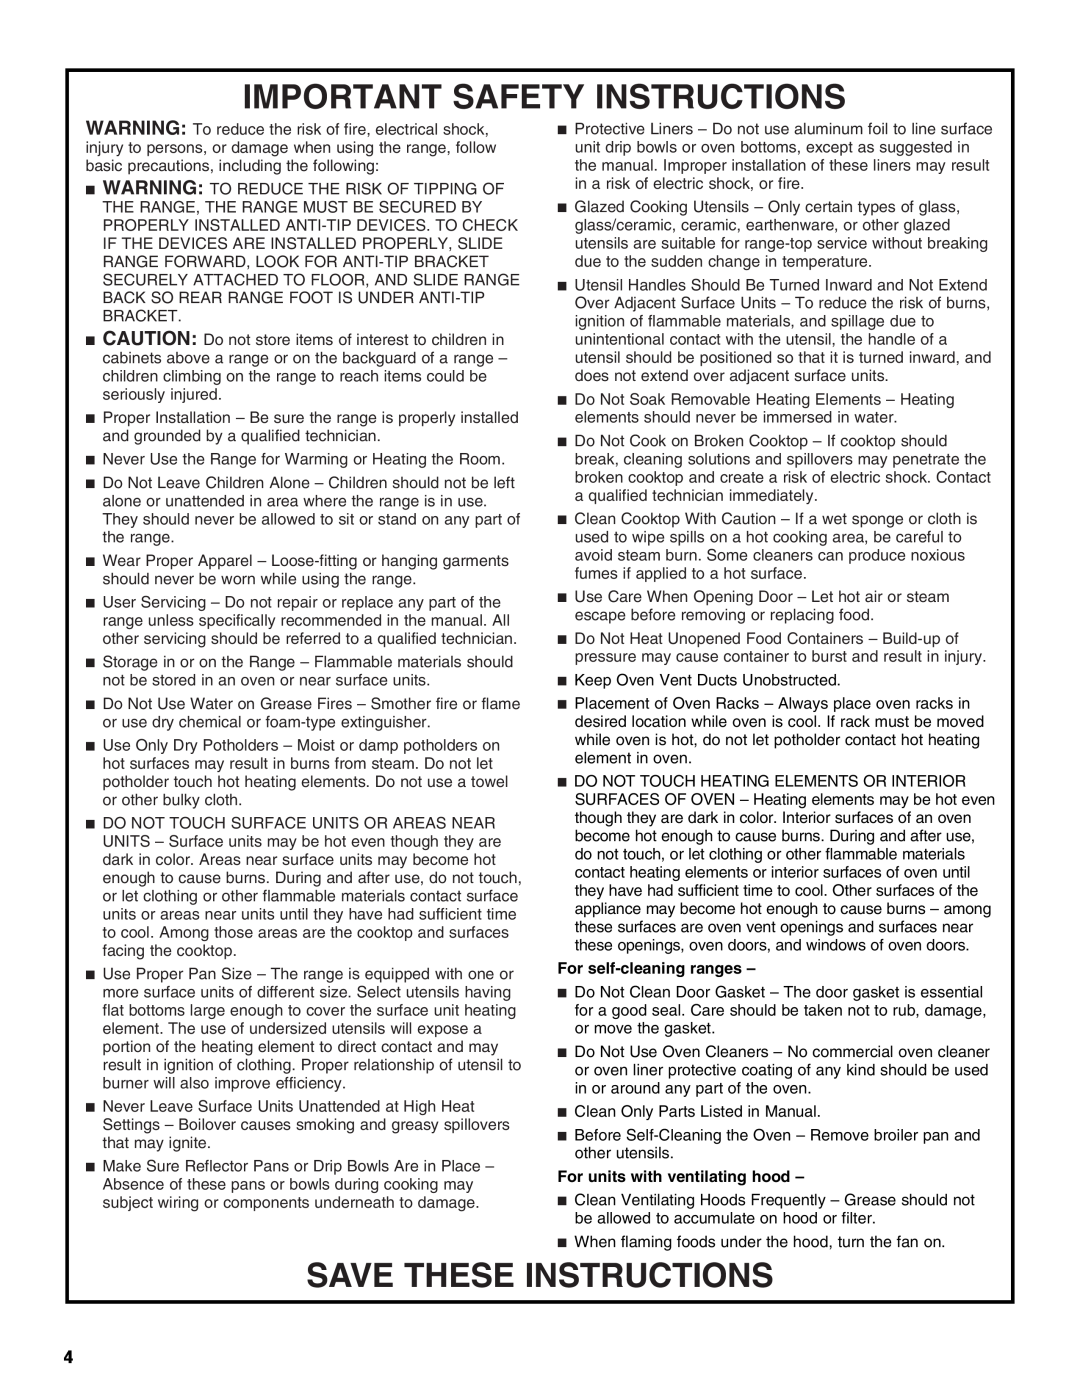 Whirlpool GERC4110PB0 manual Important Safety Instructions, Save These Instructions, For self-cleaning ranges 